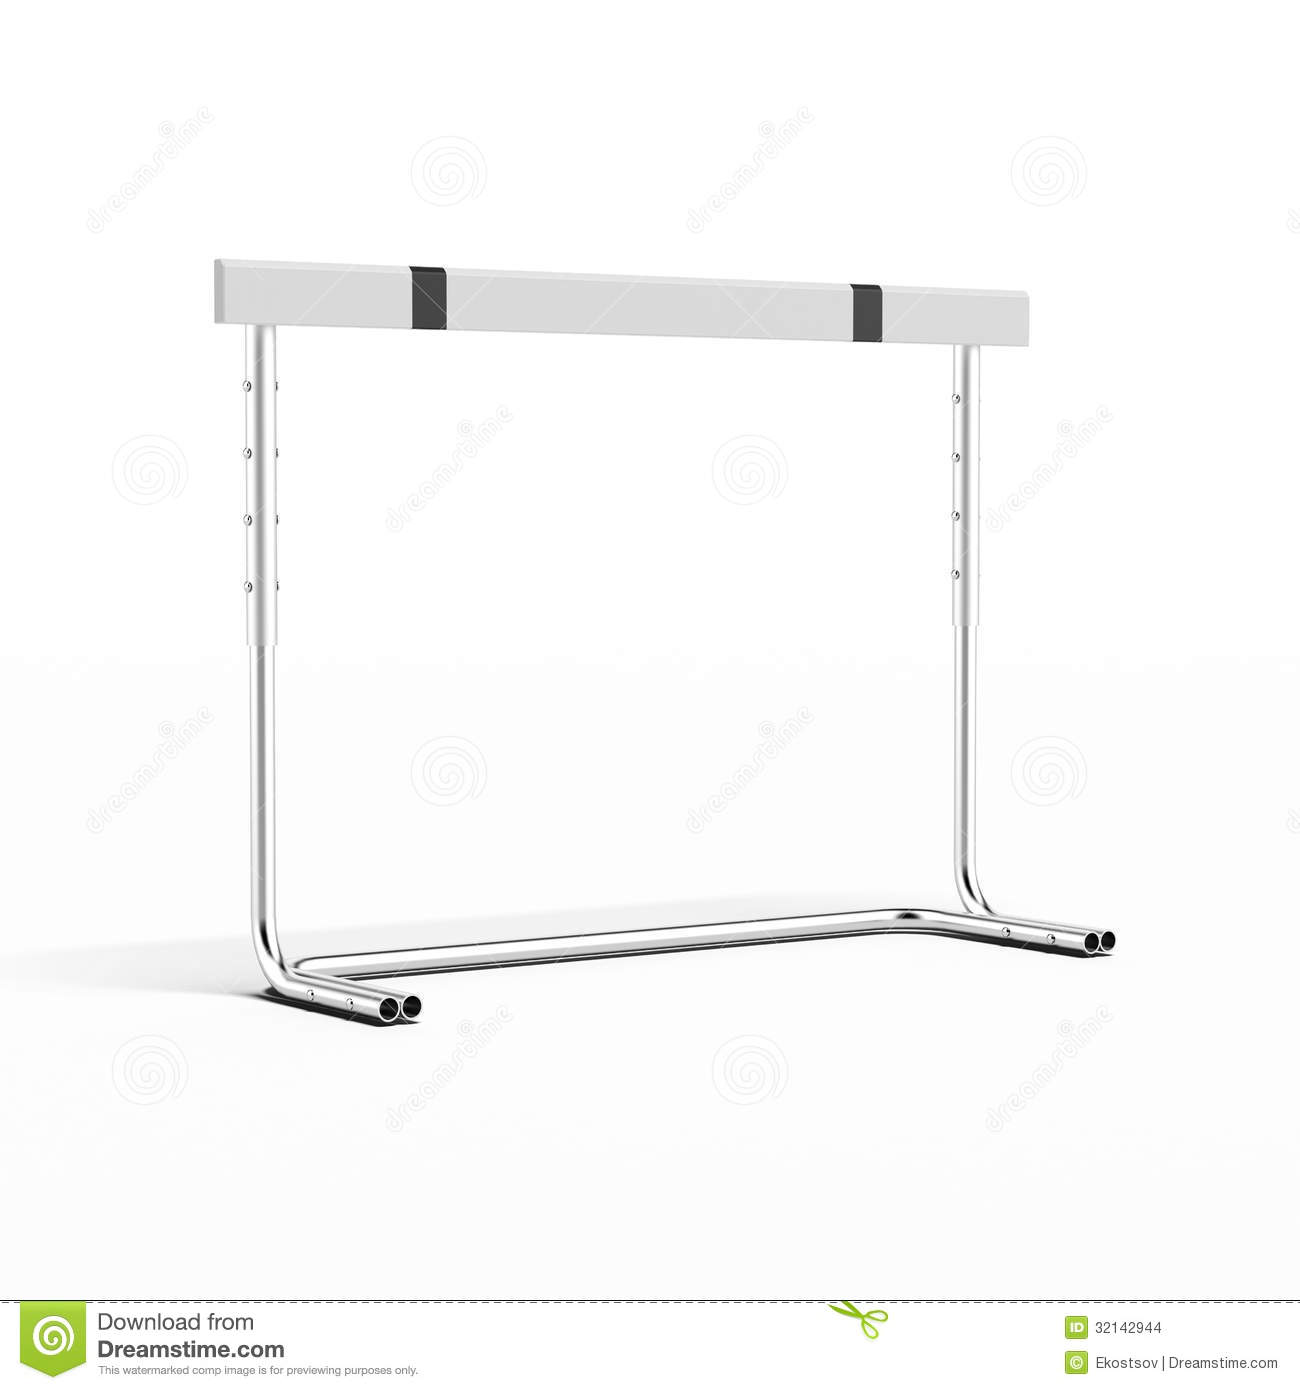 Sports Hurdle Isolated On A White Background 